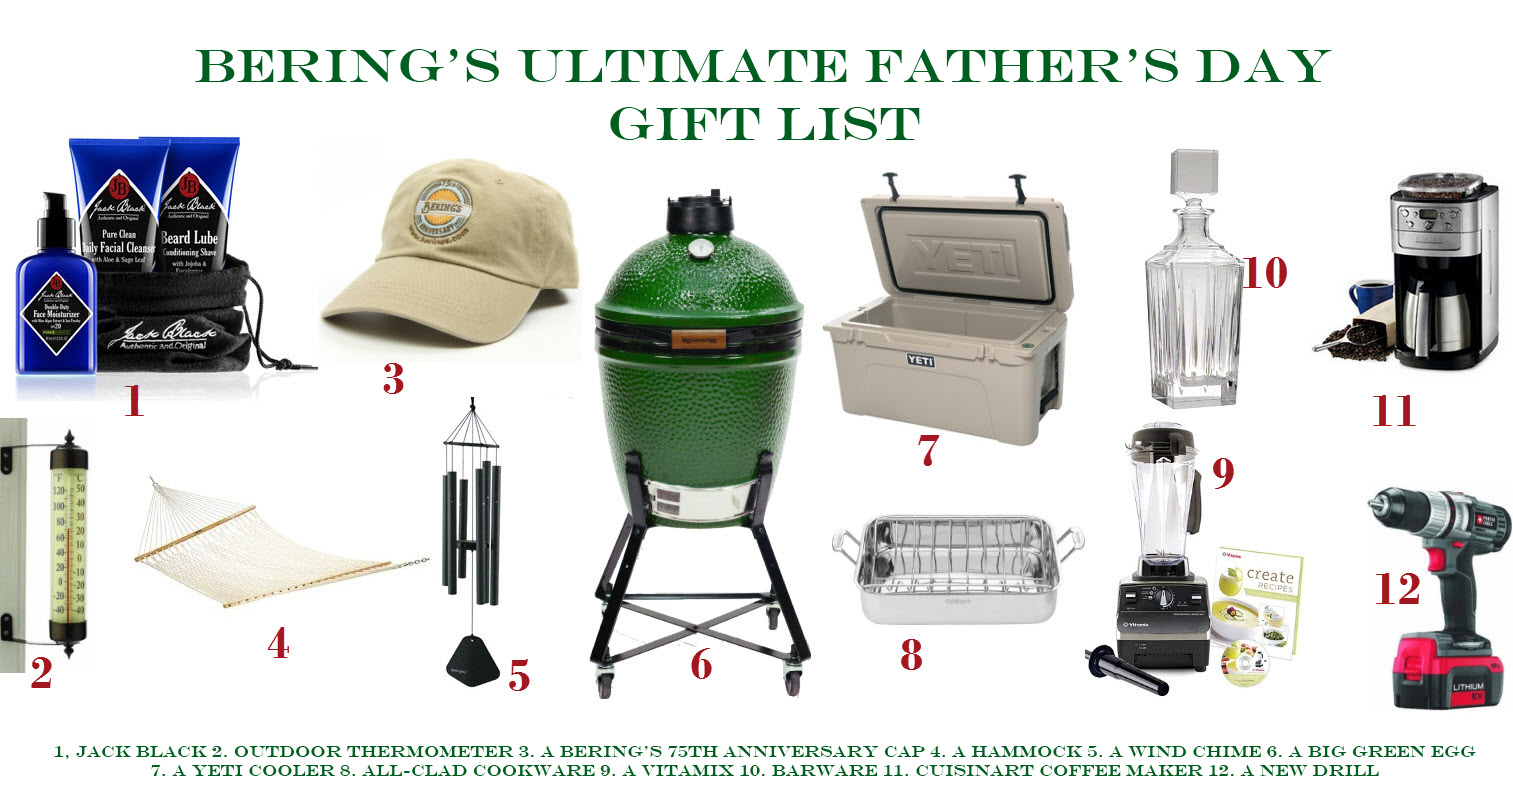 The Ultimate Father's Day Gift List 